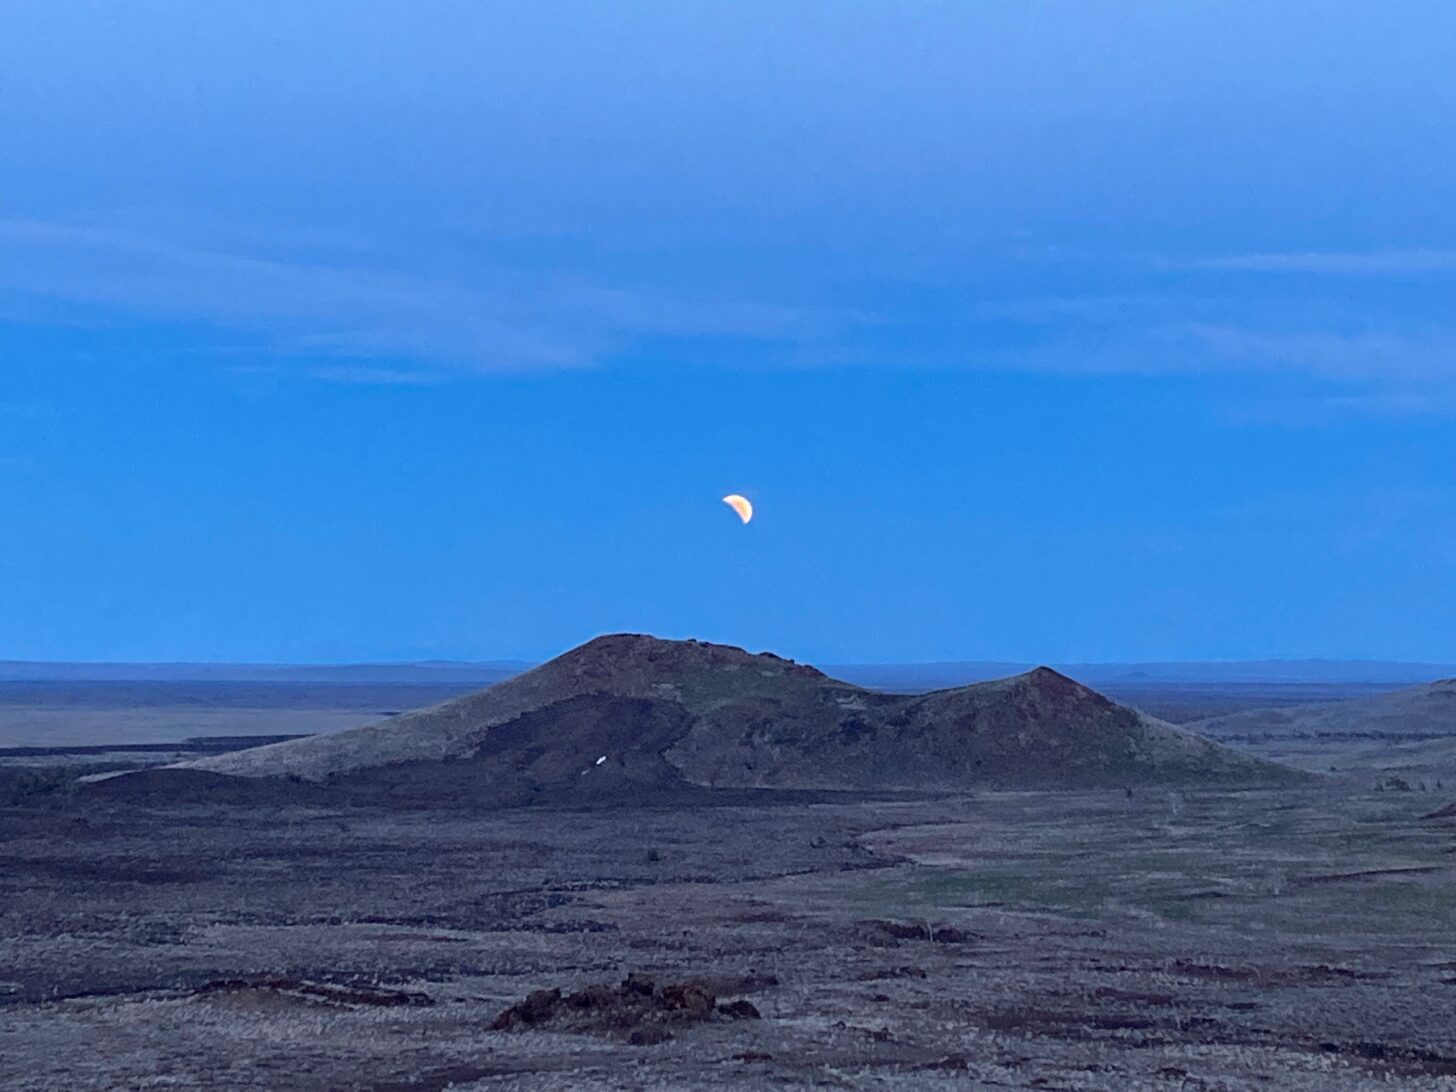 A moon in the early phases of a lunar eclipse is shown above a stark landscape.